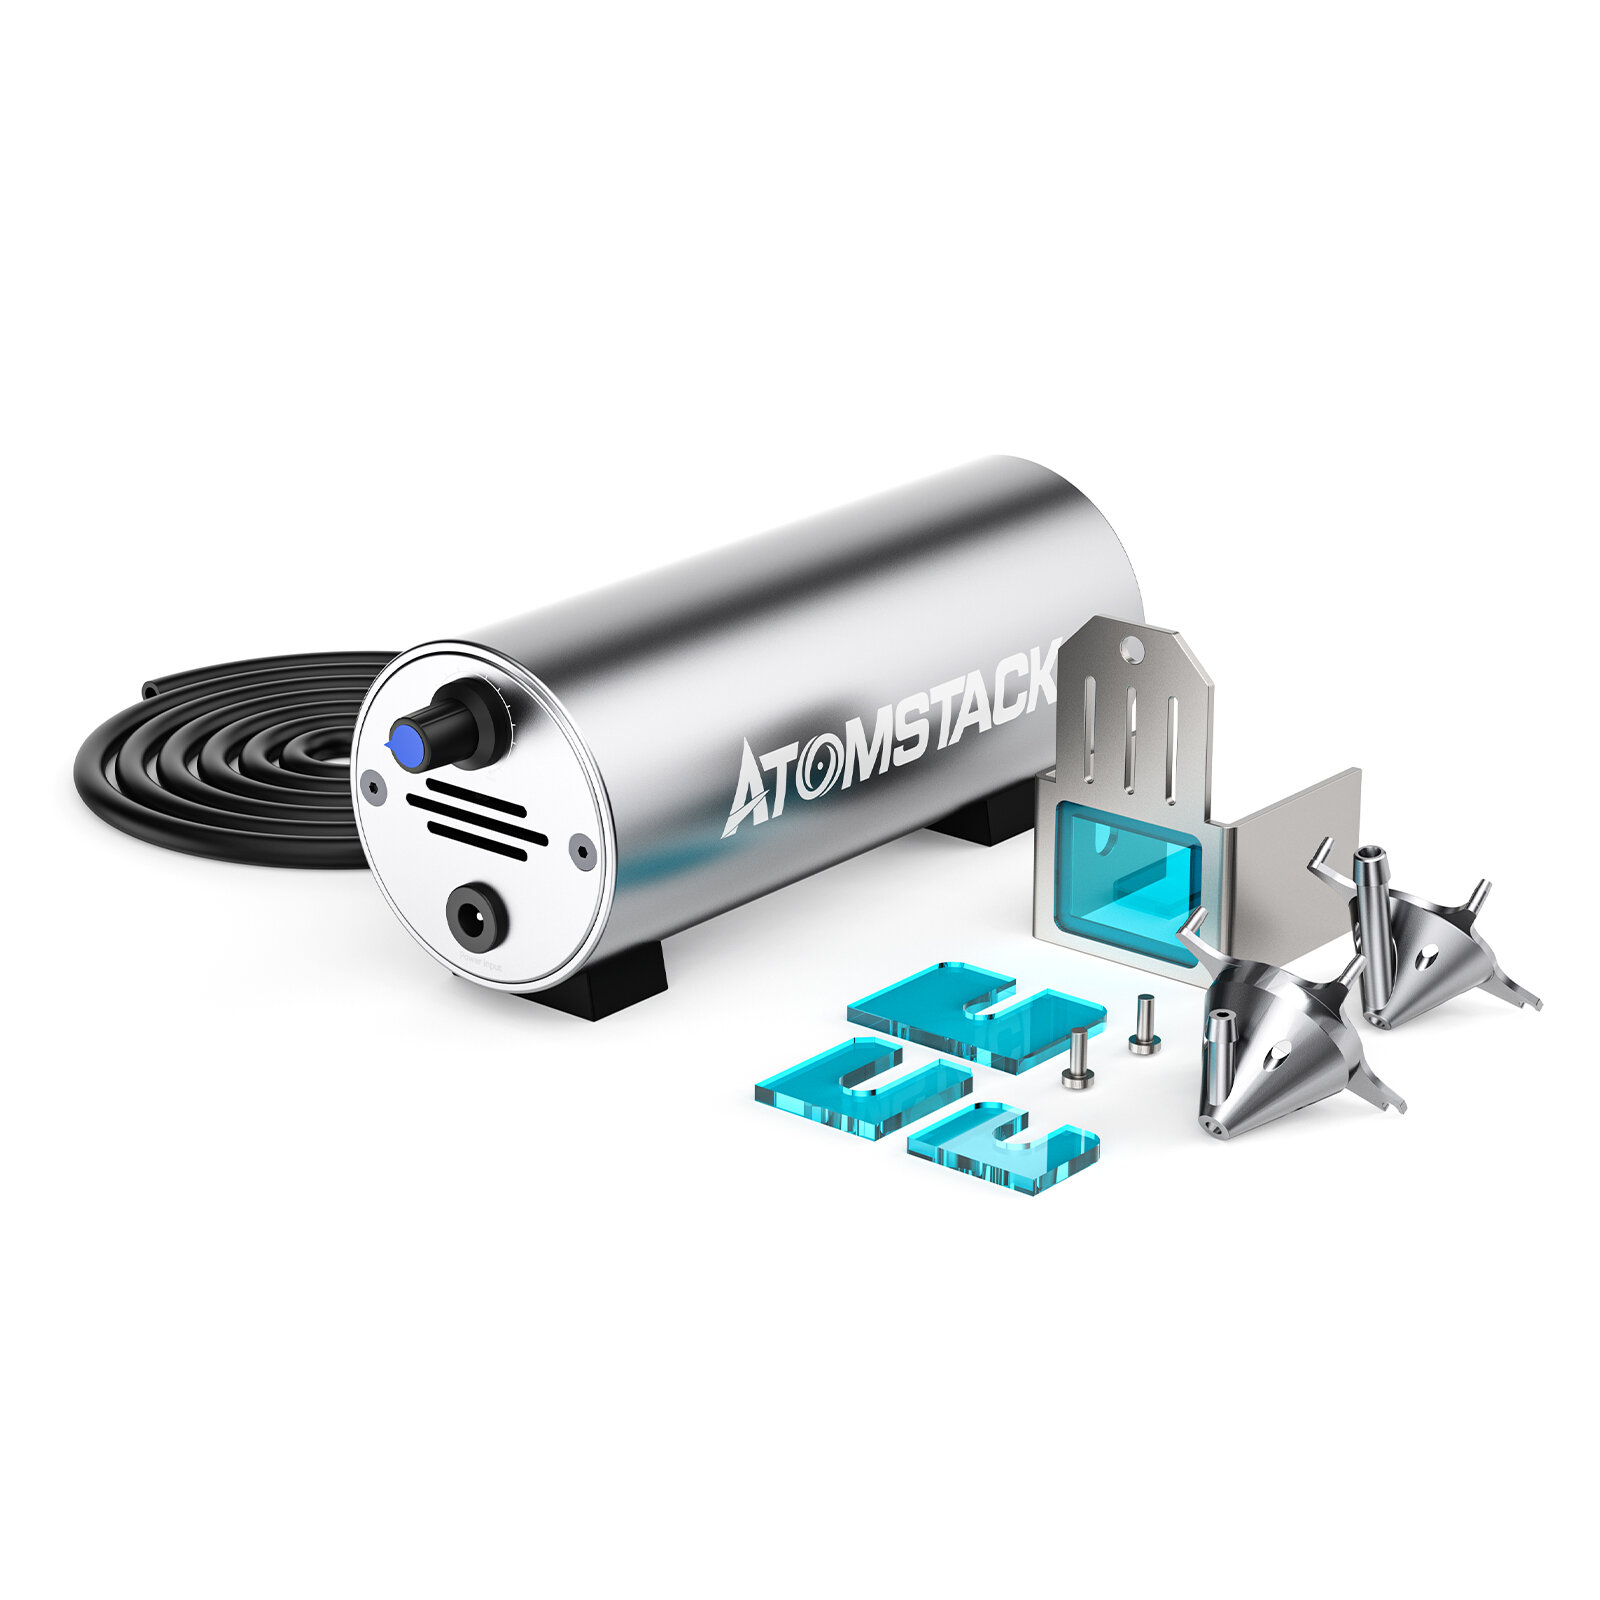 Atomstack Air Assist System for Laser Engraving Machine za $79.99 / ~356zł